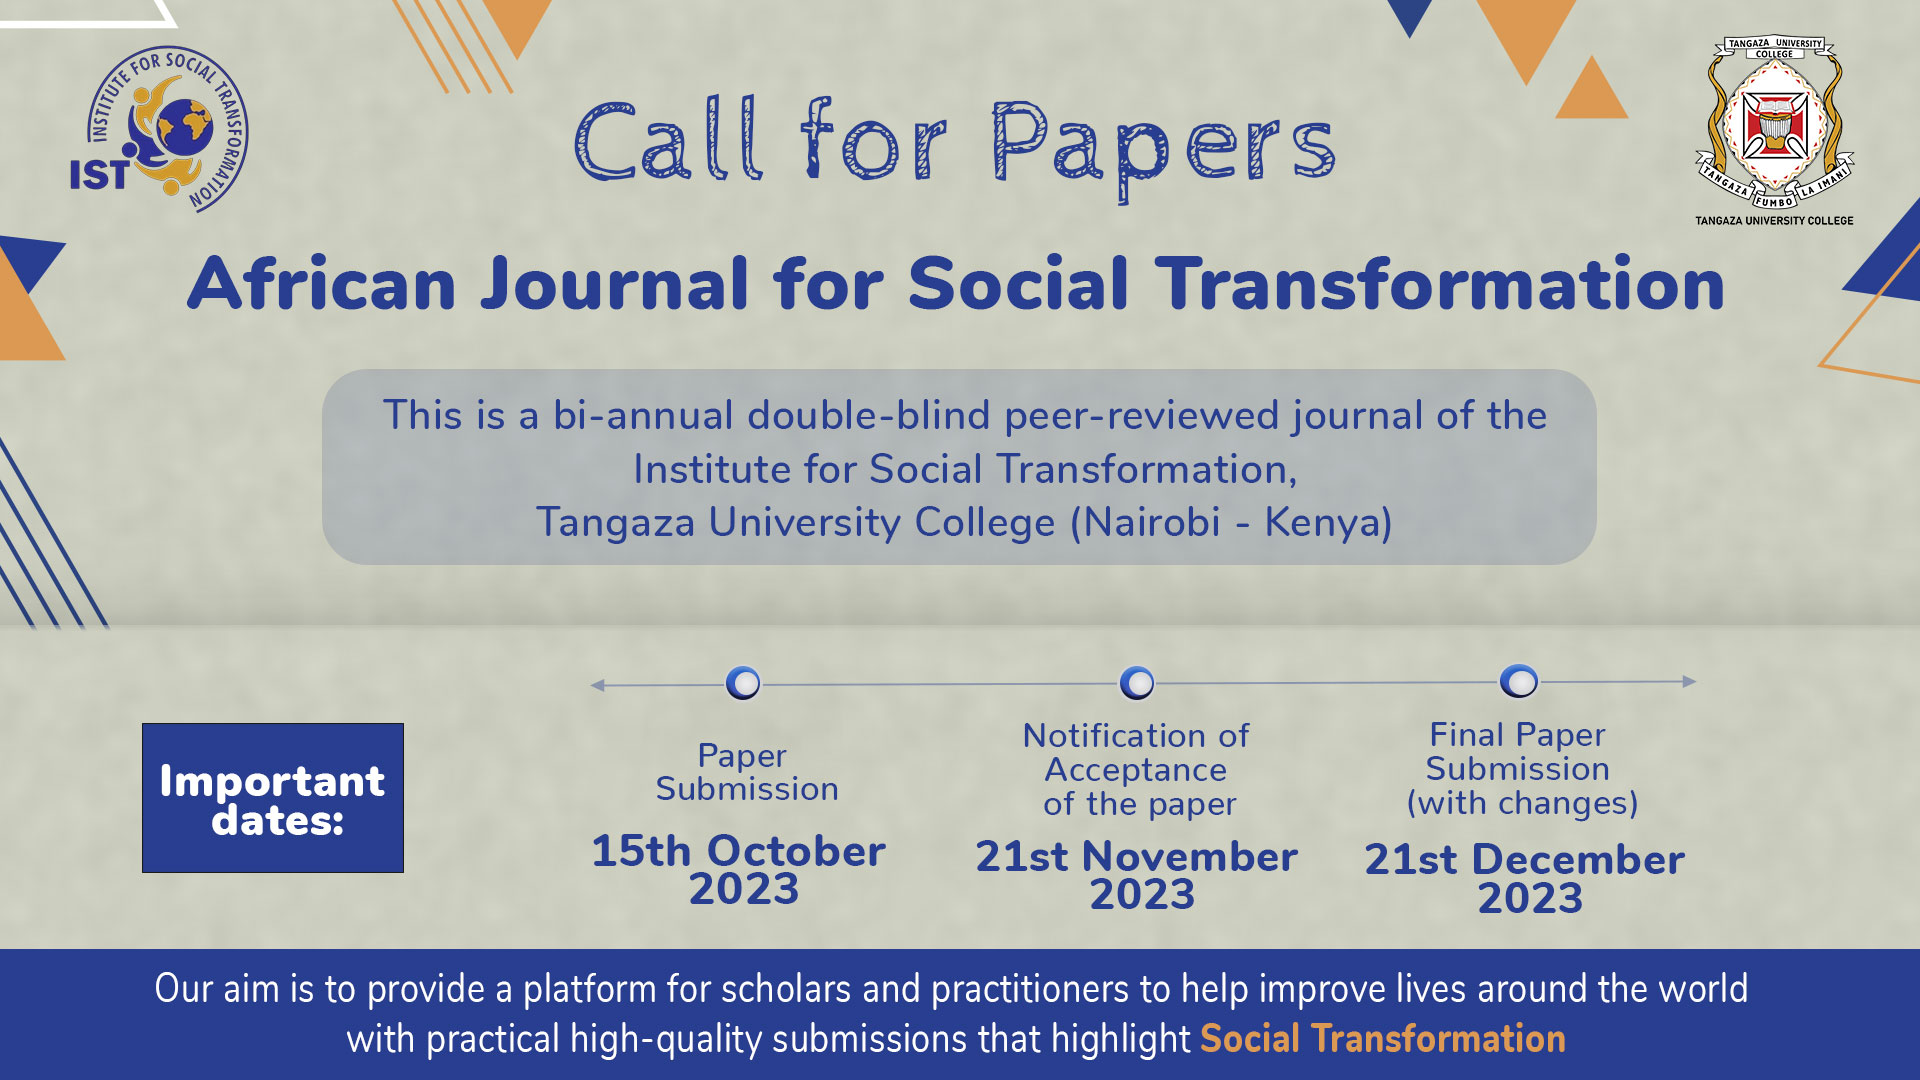 Call for Papers (Africa Journal of Social Transformation)